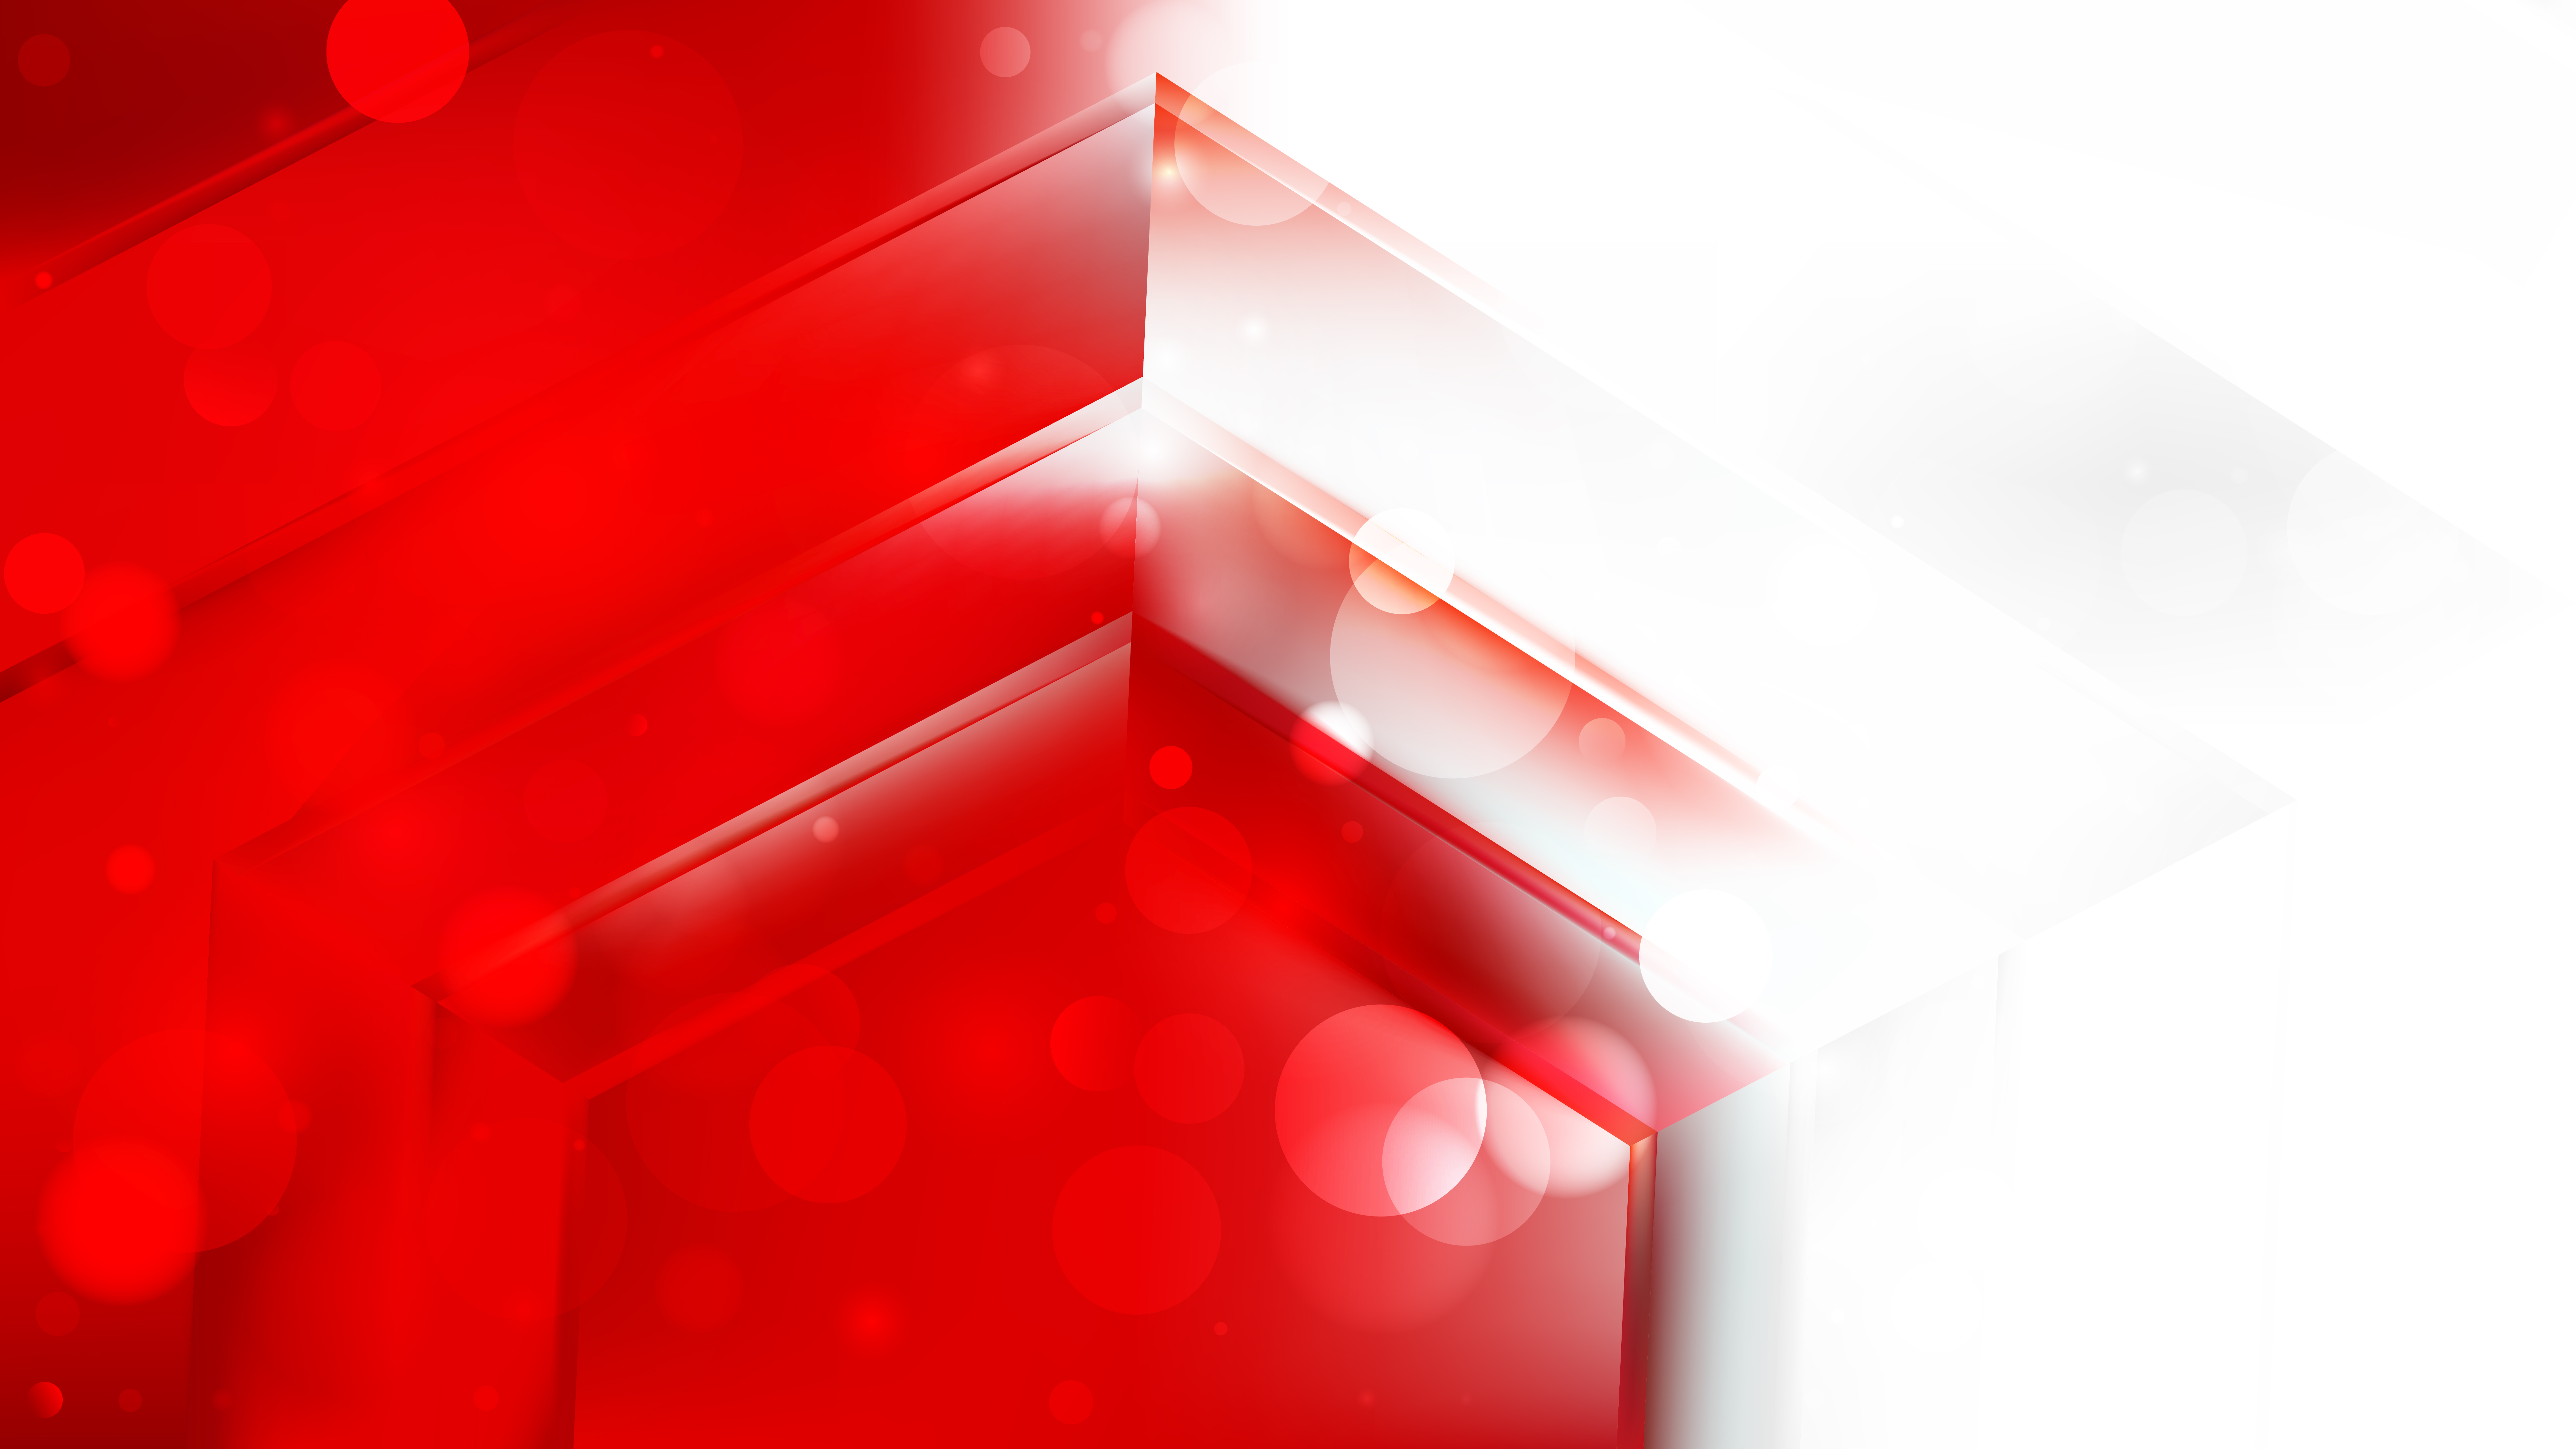 Red And White Abstract Background Cheap Sale, 56% OFF 